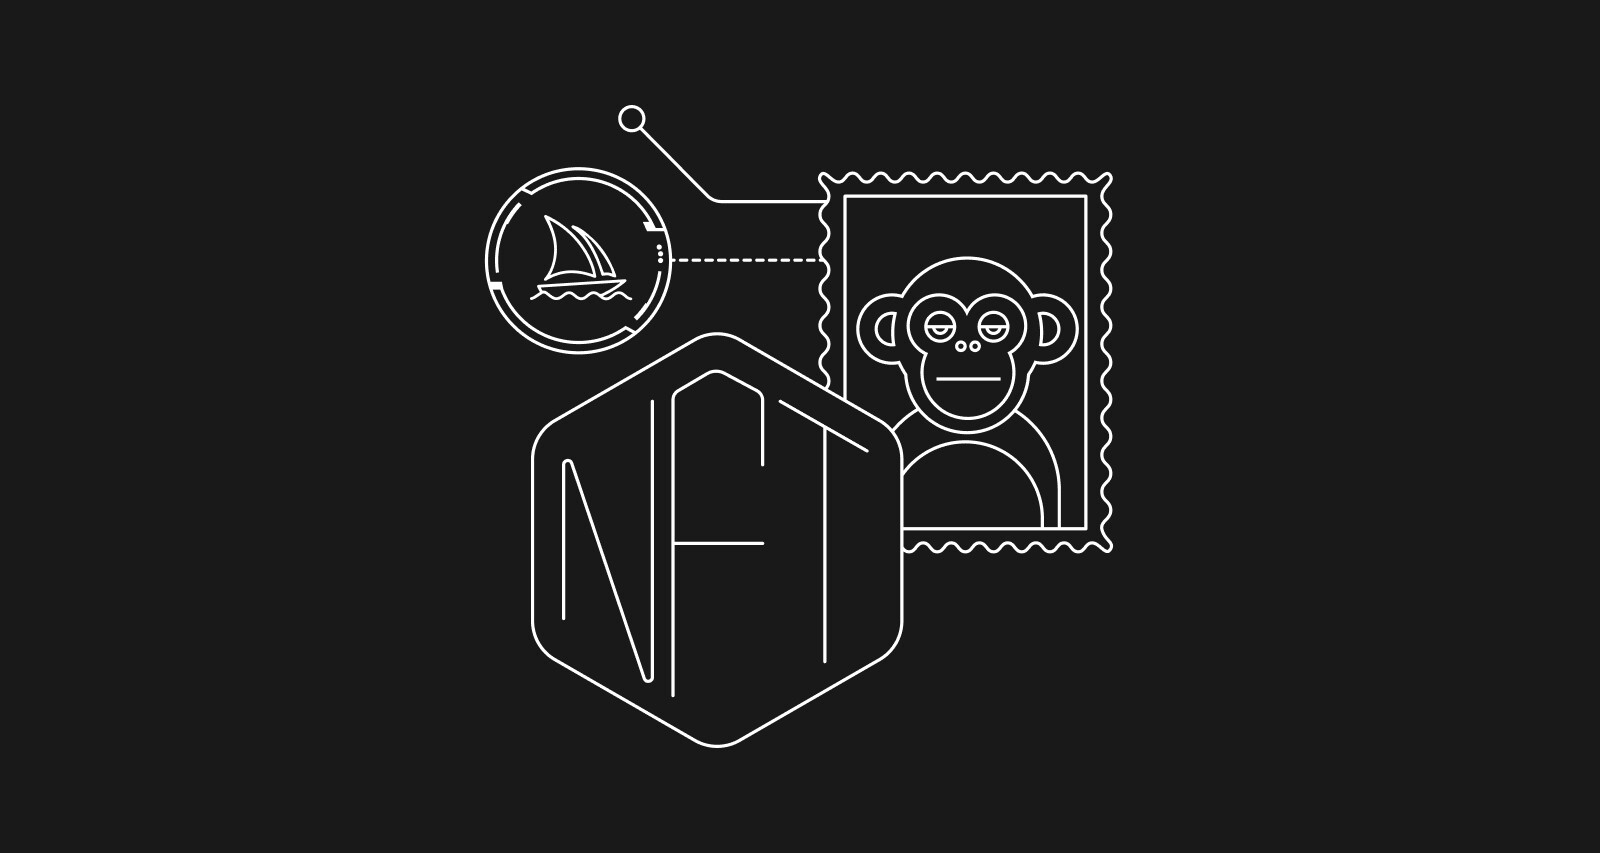 How to use Midjourney to create NFTs: A step-by-step guide